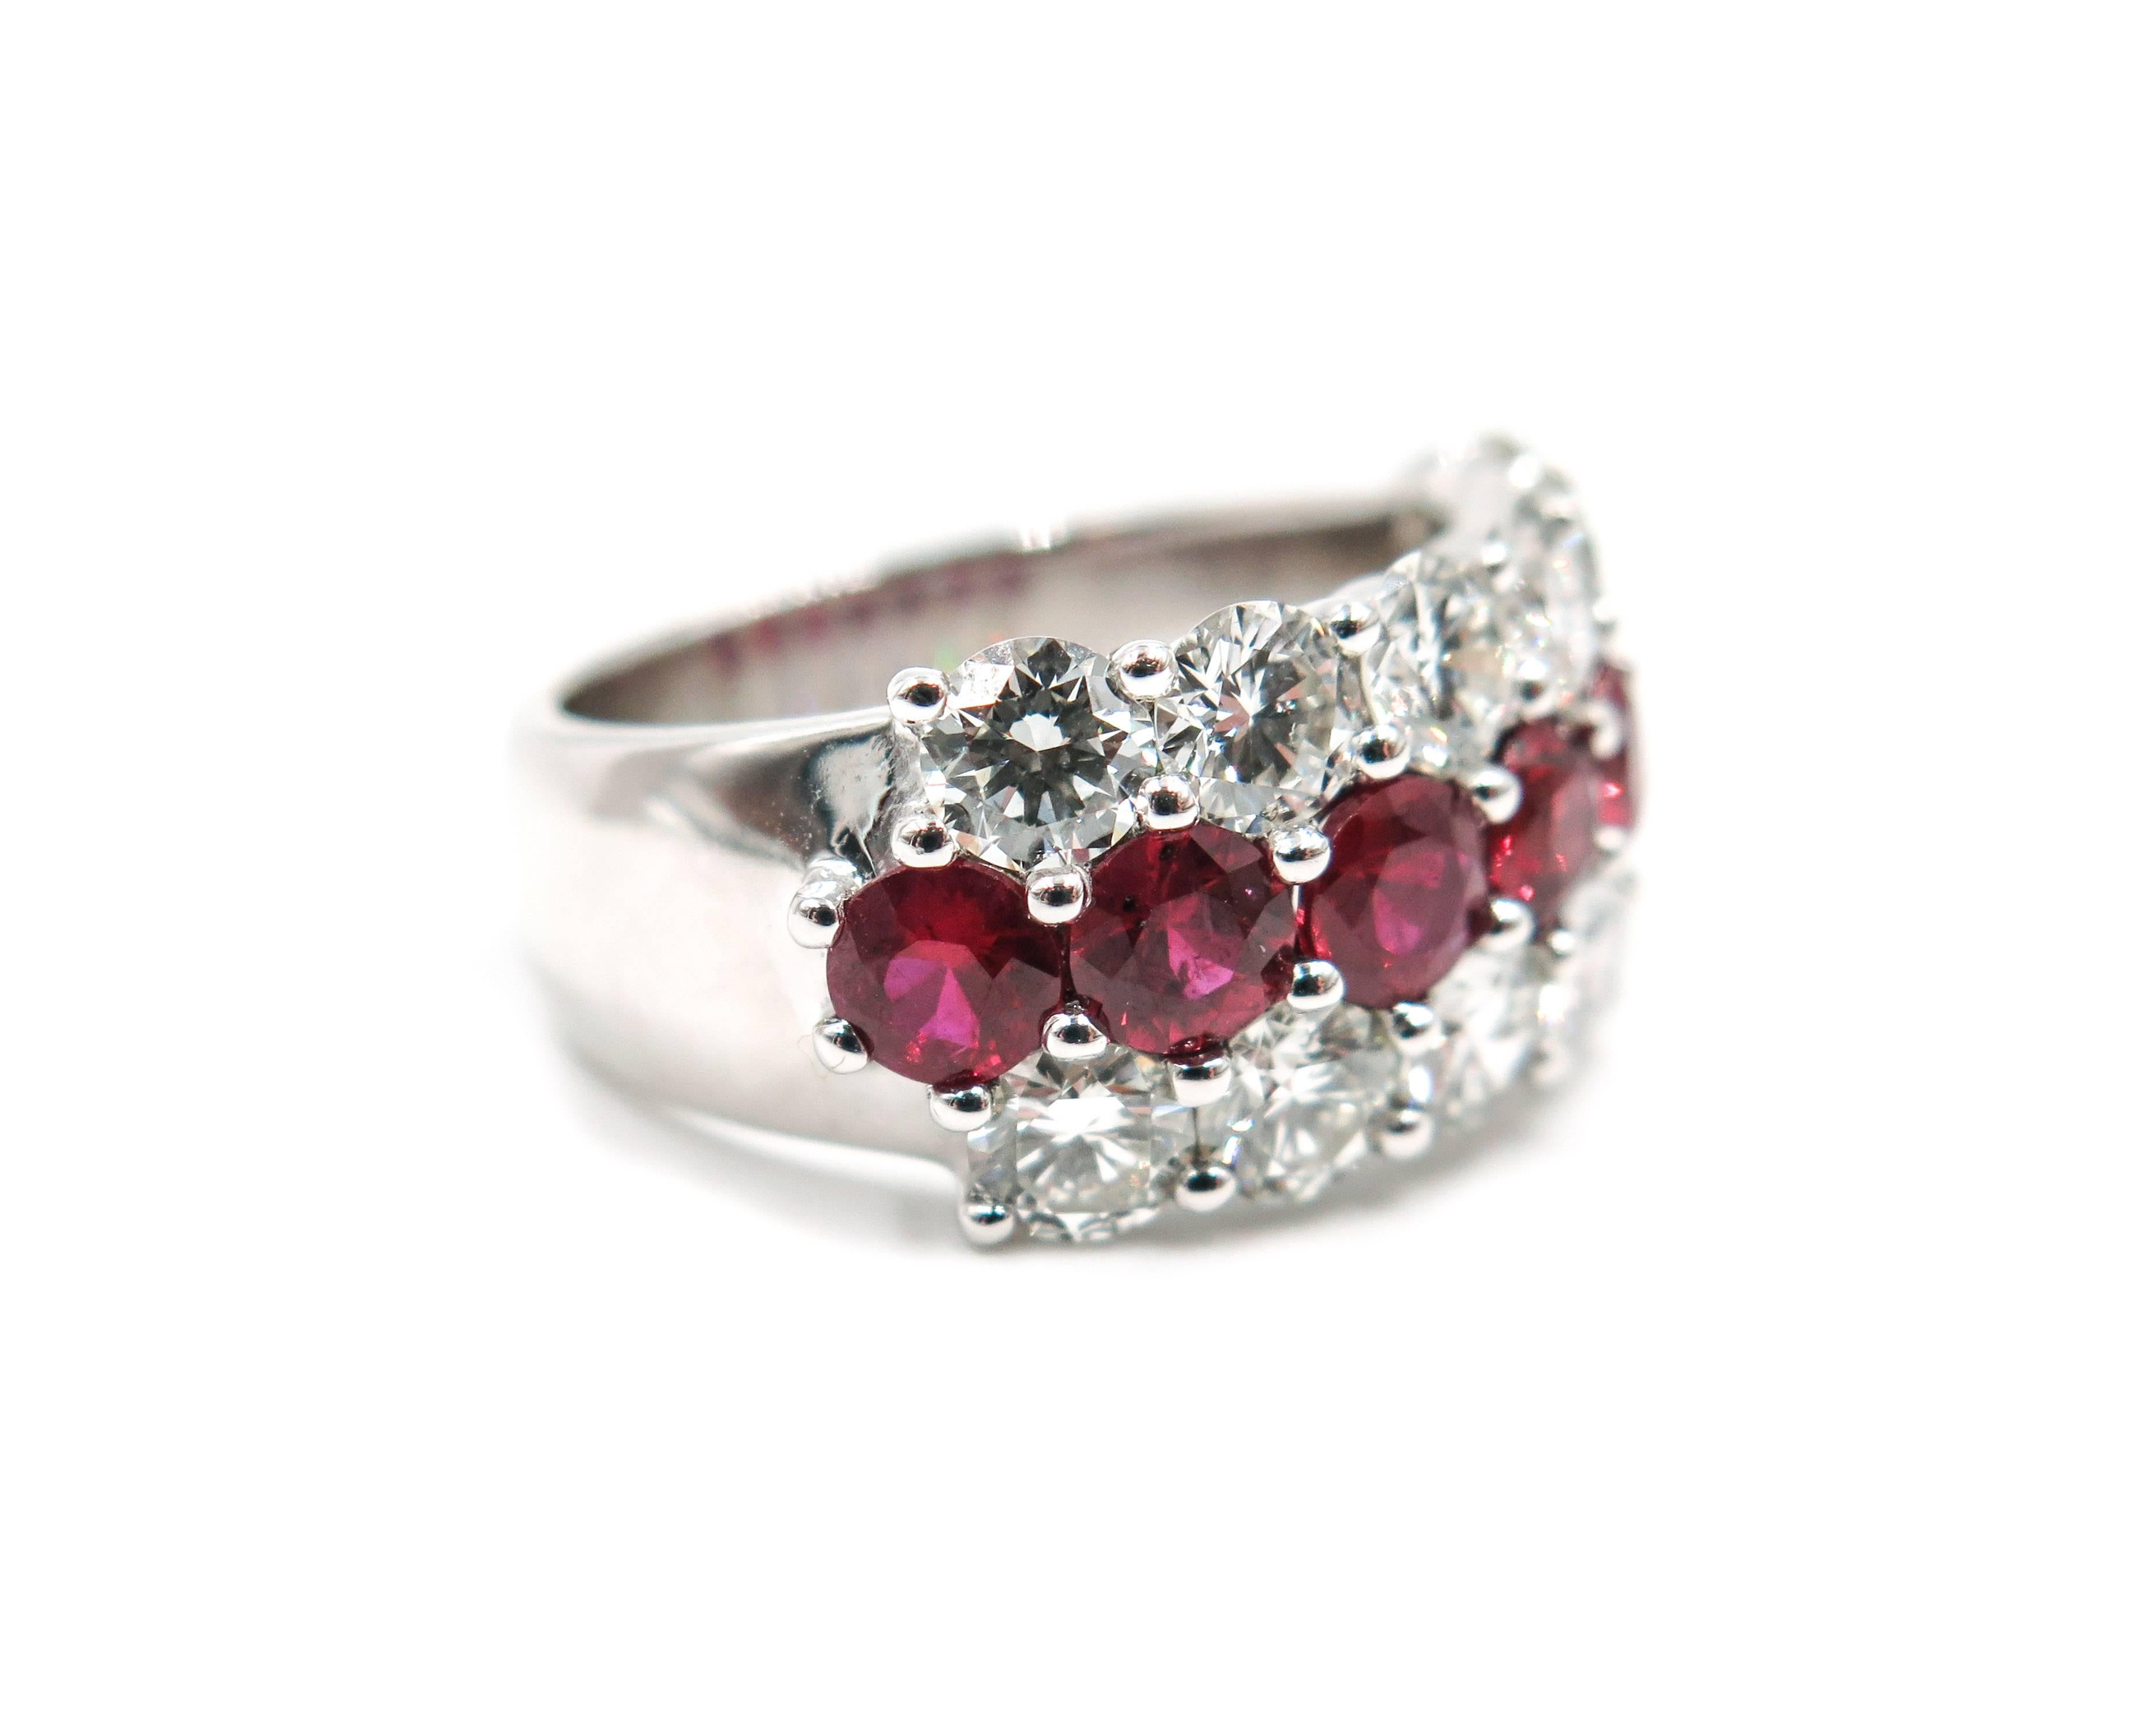 This magnificent ruby and diamond ring features 3 rows of mesmerizing brilliance.
Handcrafted in Platinum and set with 12 round brilliant cut diamonds weighing 2.45 carats total, G/H color, VS clarity. Further accenting the diamonds are 7 round cut